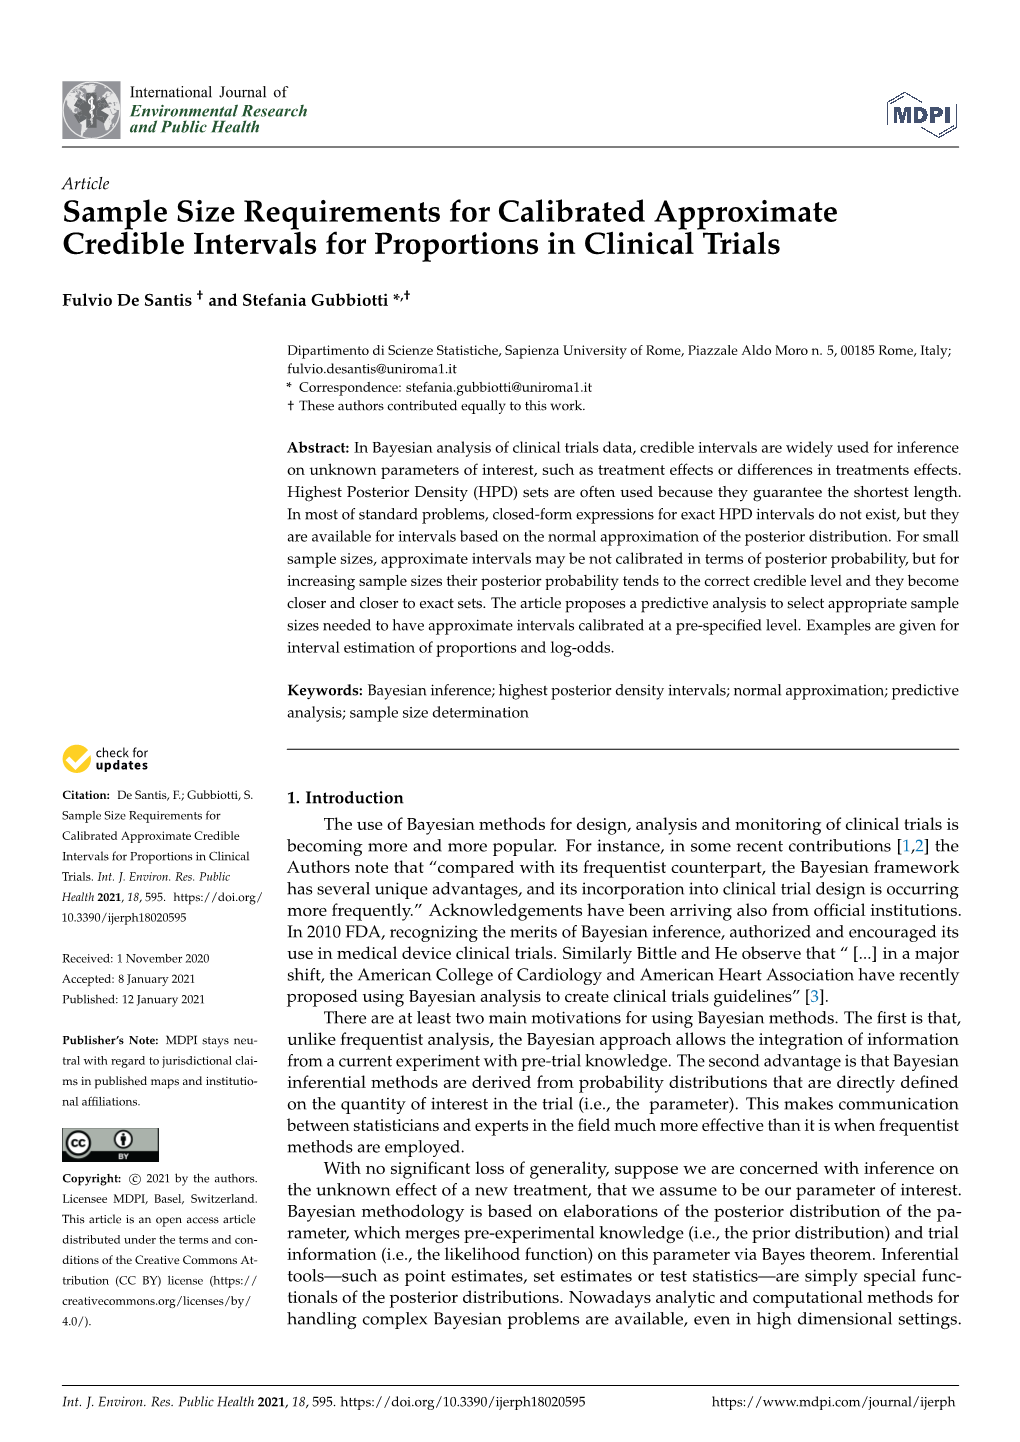 Sample Size Requirements for Calibrated Approximate Credible Intervals for Proportions in Clinical Trials